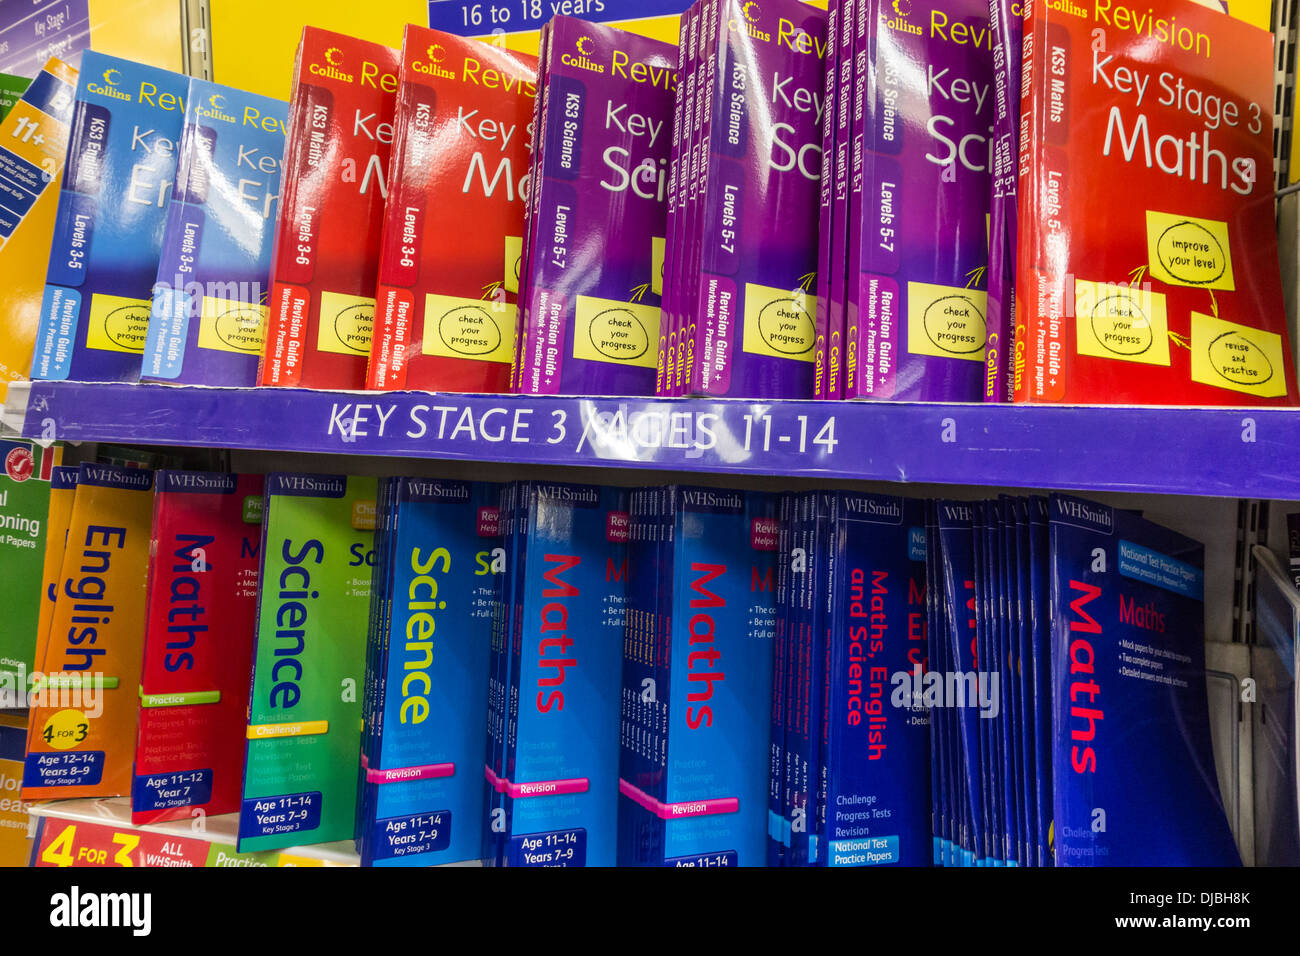 Key Stage 3 (Ages 11-14) Revision books on display at WH Smith, UK Stock Photo